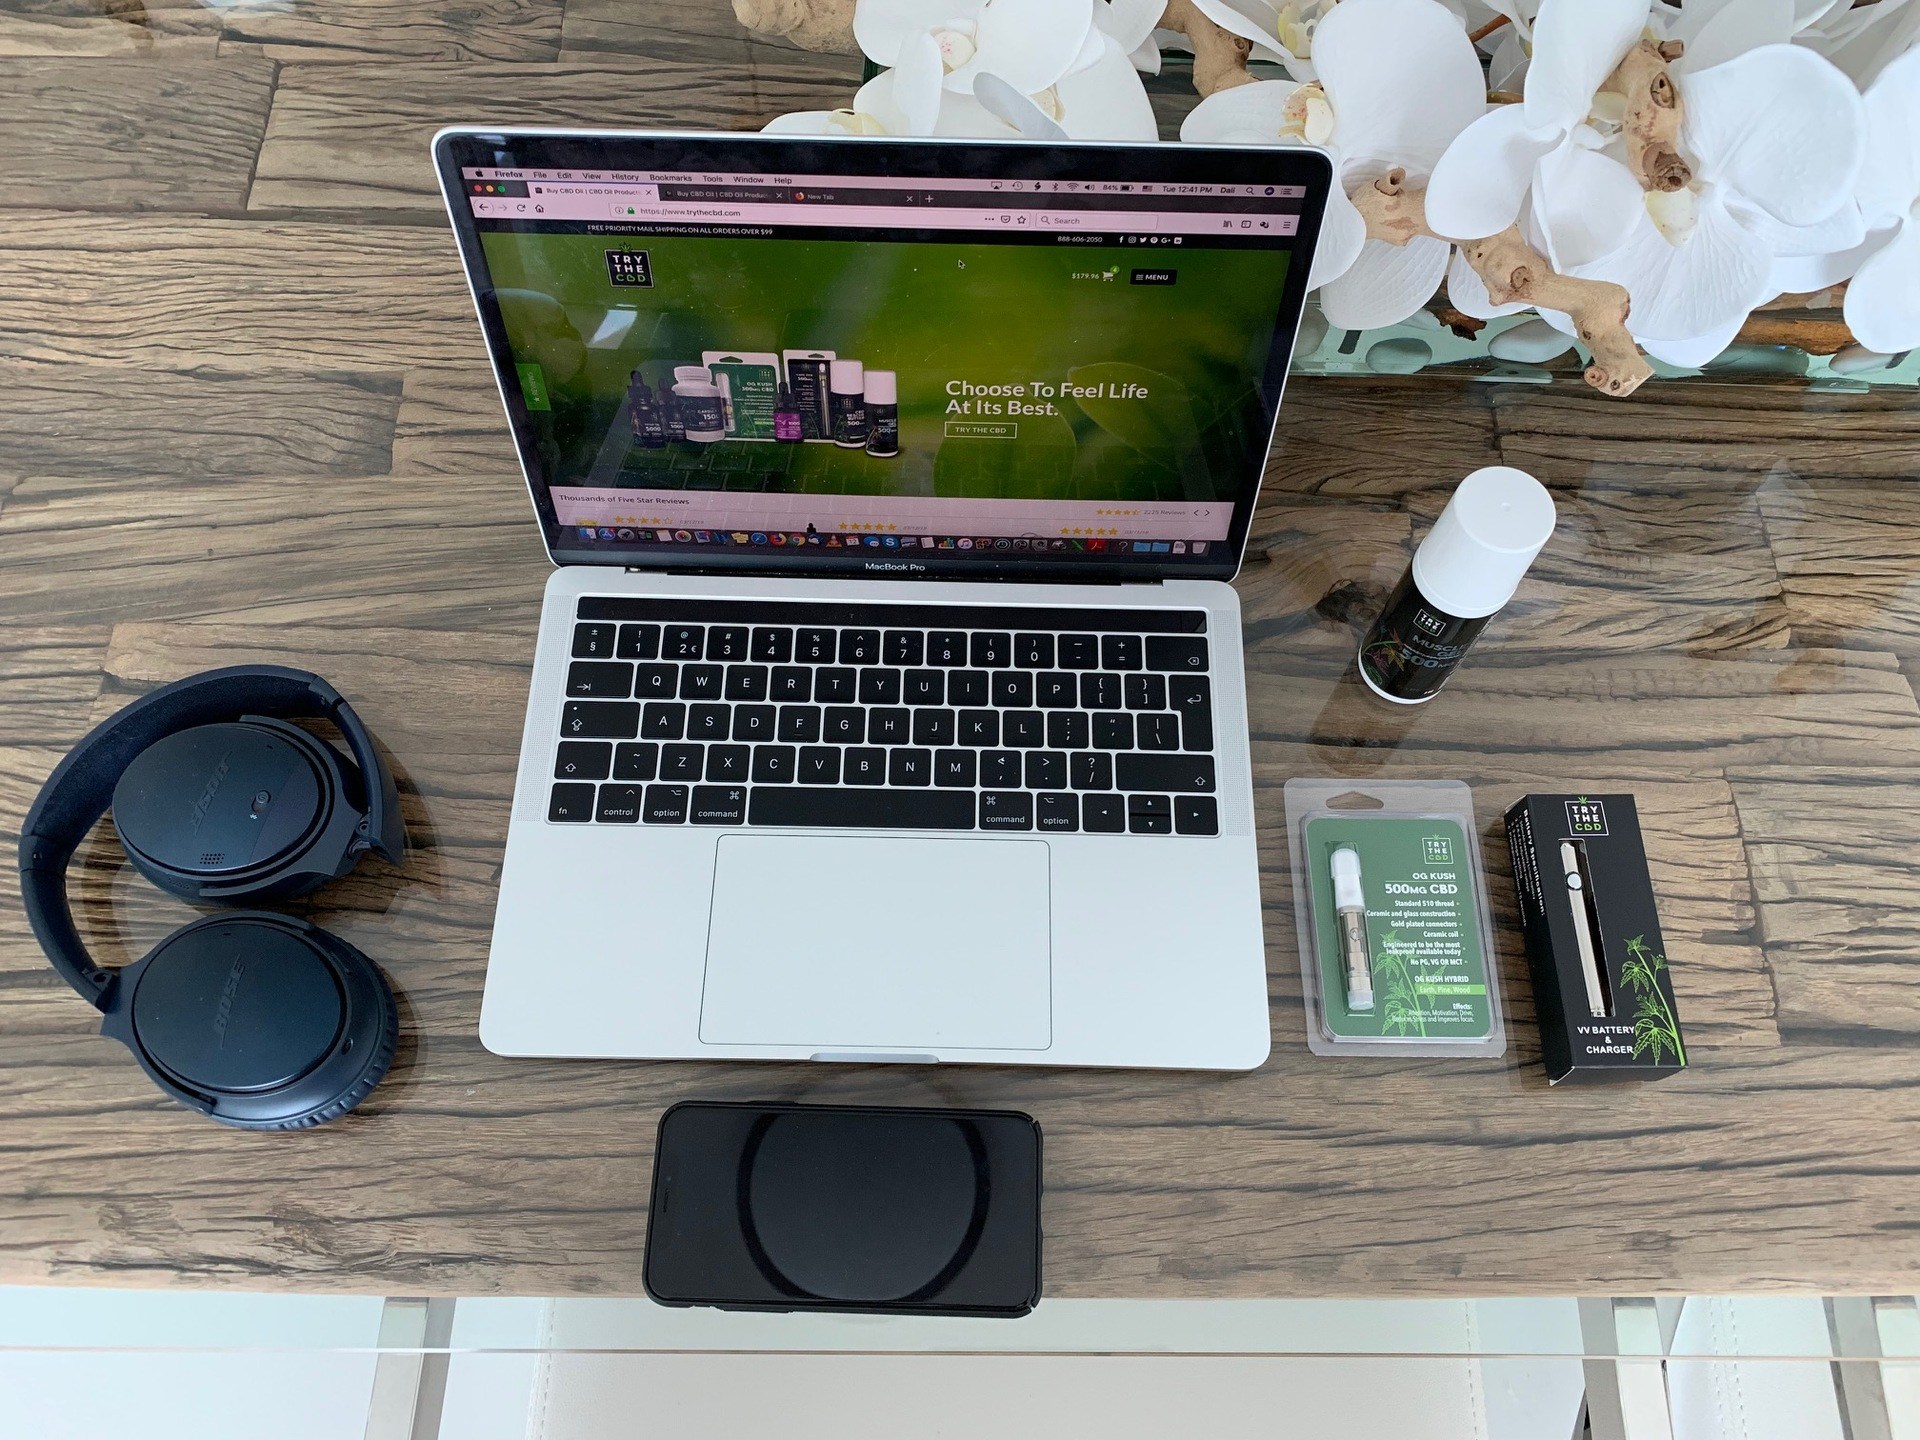 TryTheCBD Vape Cartridges combine CBD isolate with plant-based terpenes in a special carrier fluid free of common irritants, for smooth delicious vaping. Photo: TryTheCBD Vape Cartridges and other TryTheCBD products posedaround a laptop on a wooden desk, with headphones nearby.